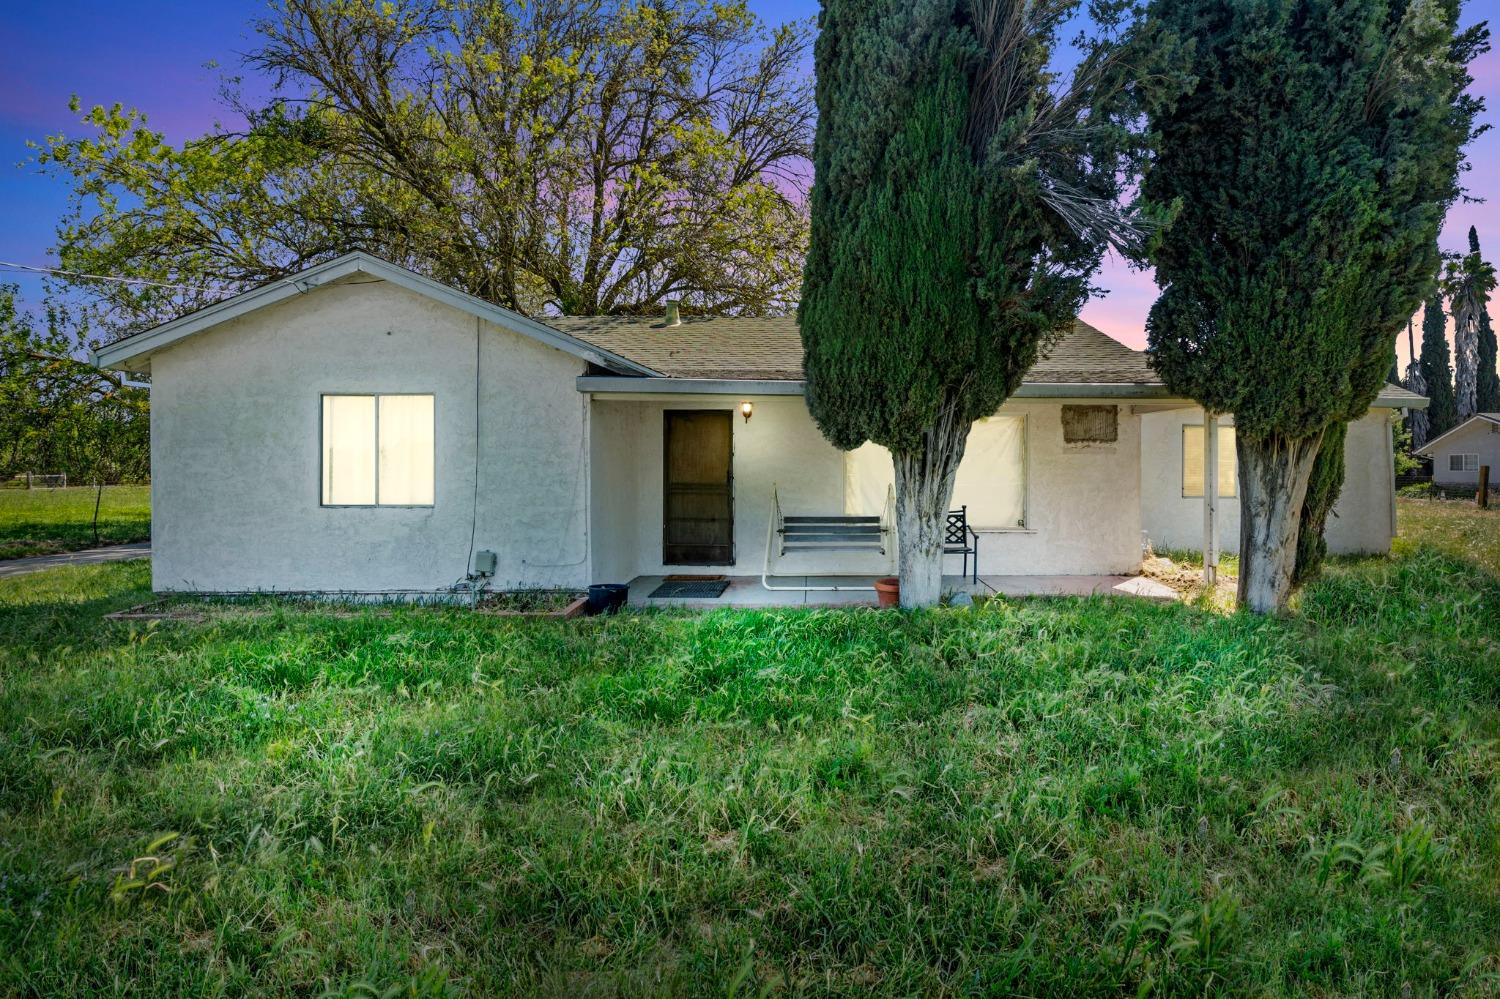 Photo of 11214 S Union Rd in Manteca, CA